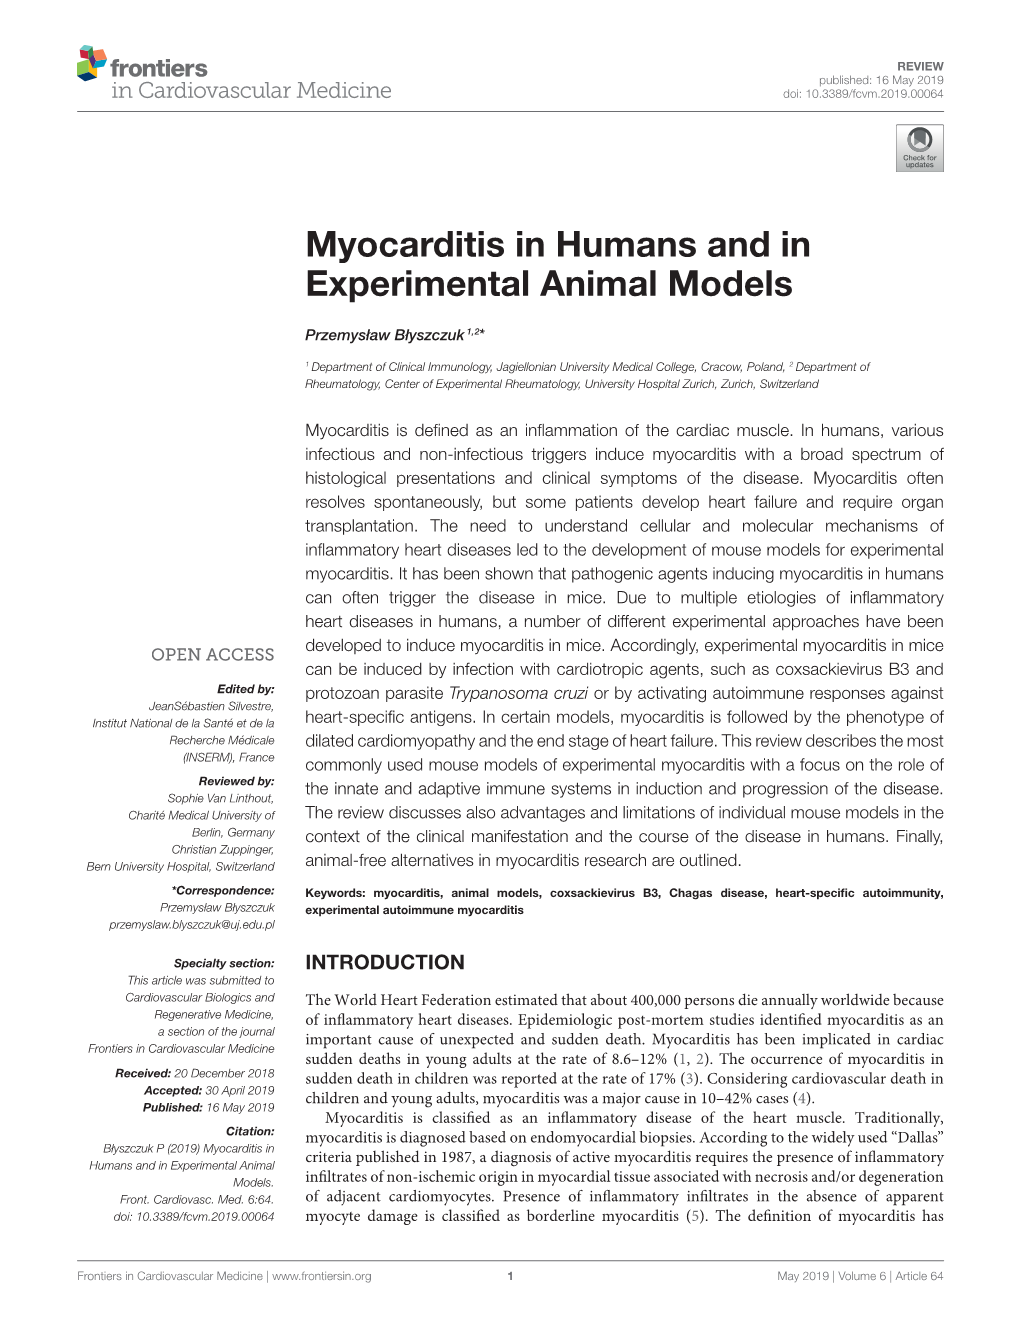 Myocarditis in Humans and in Experimental Animal Models